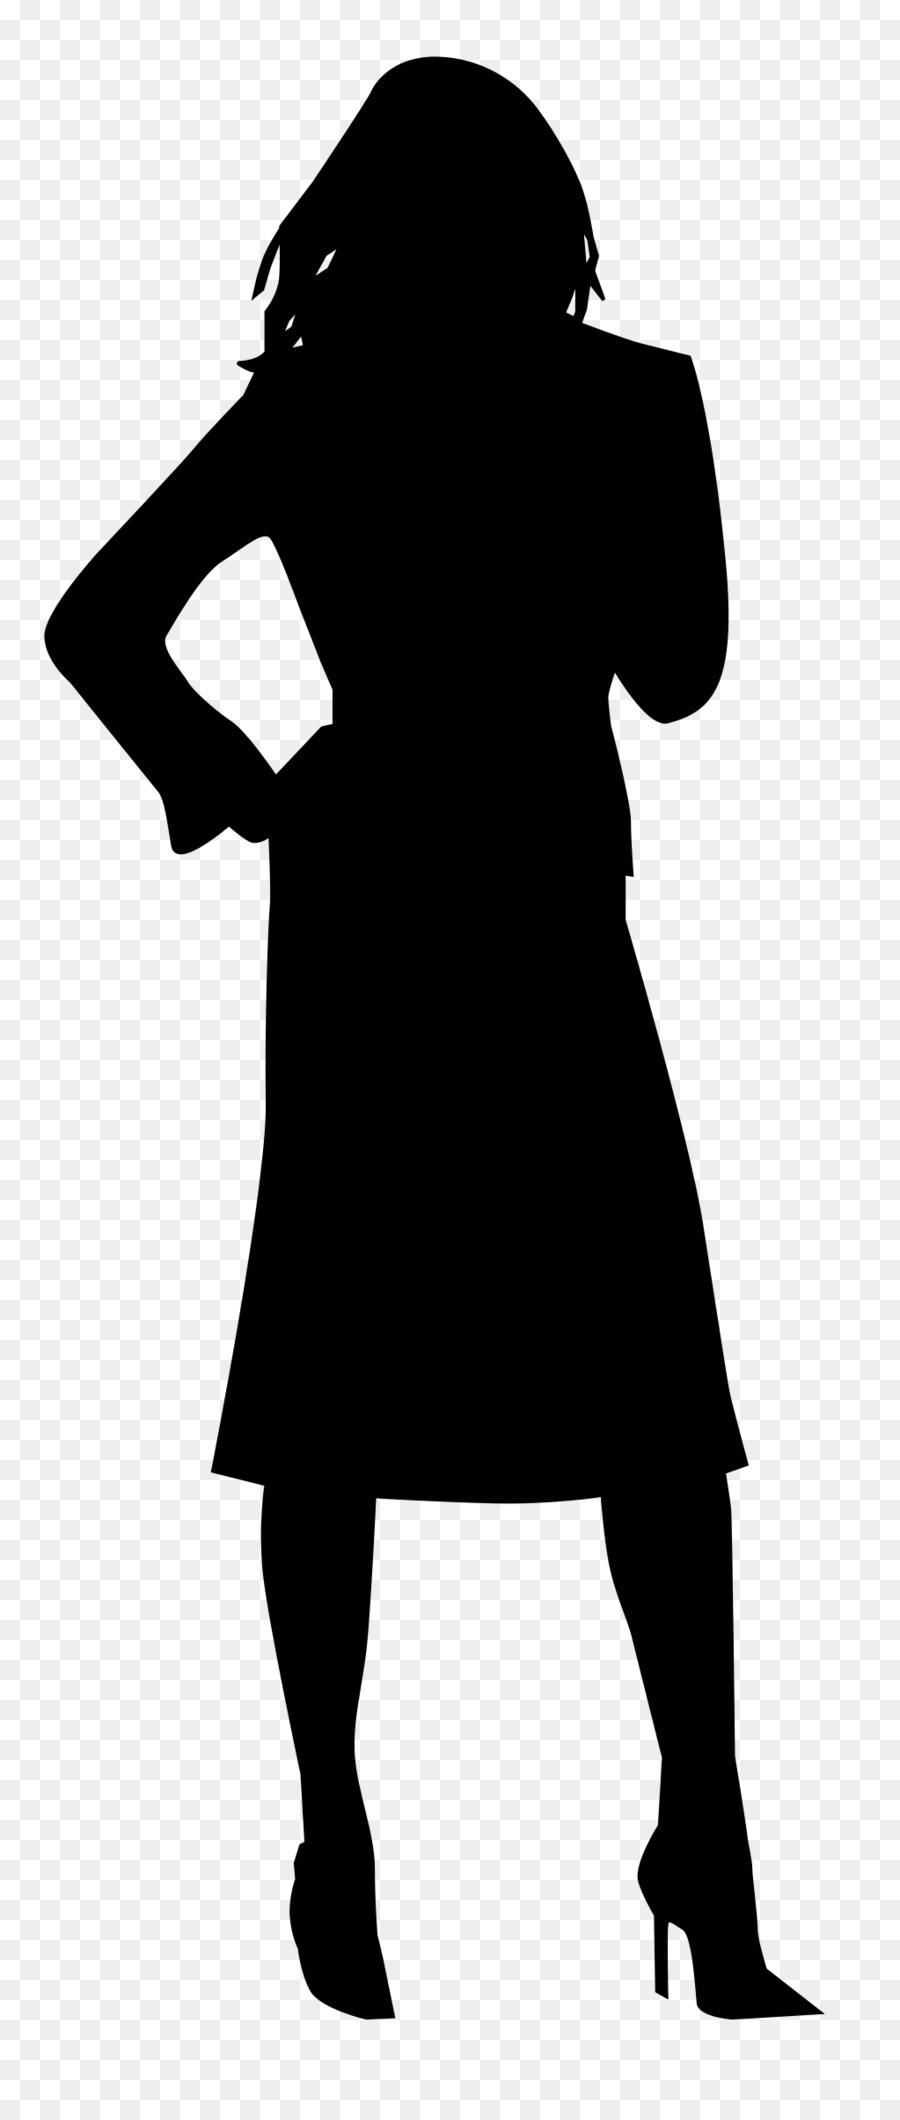 Free Woman Silhouette Outline, Download Free Woman Silhouette Outline